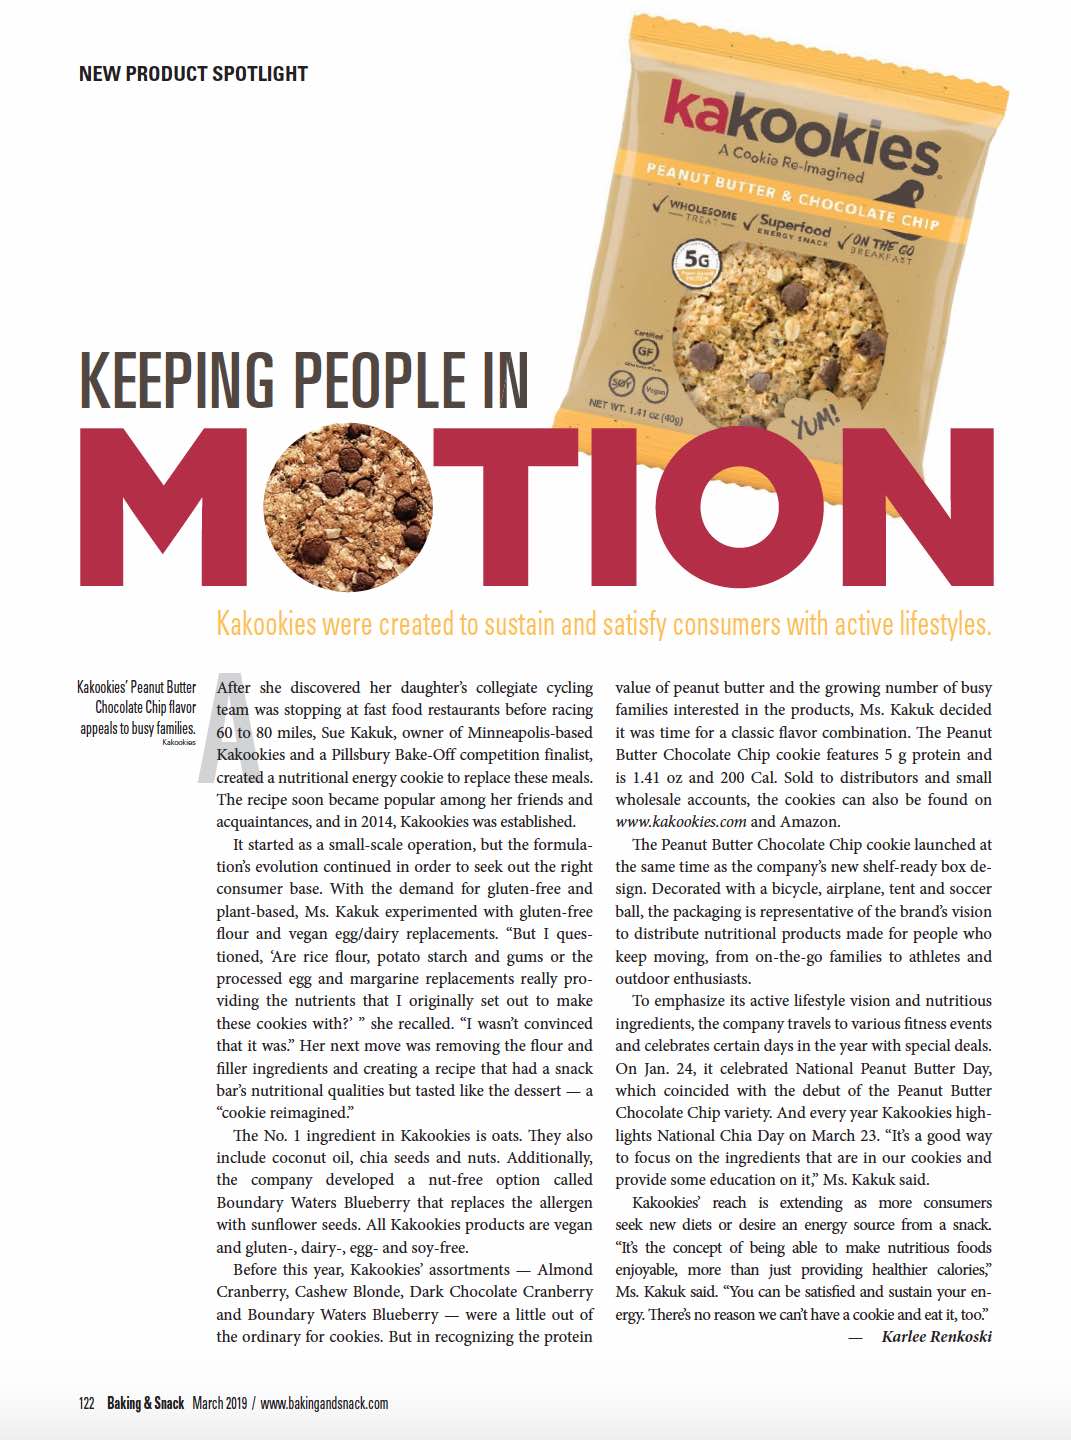 Kakookies featured in New Product Spotlight in Baking and Snack Magazine